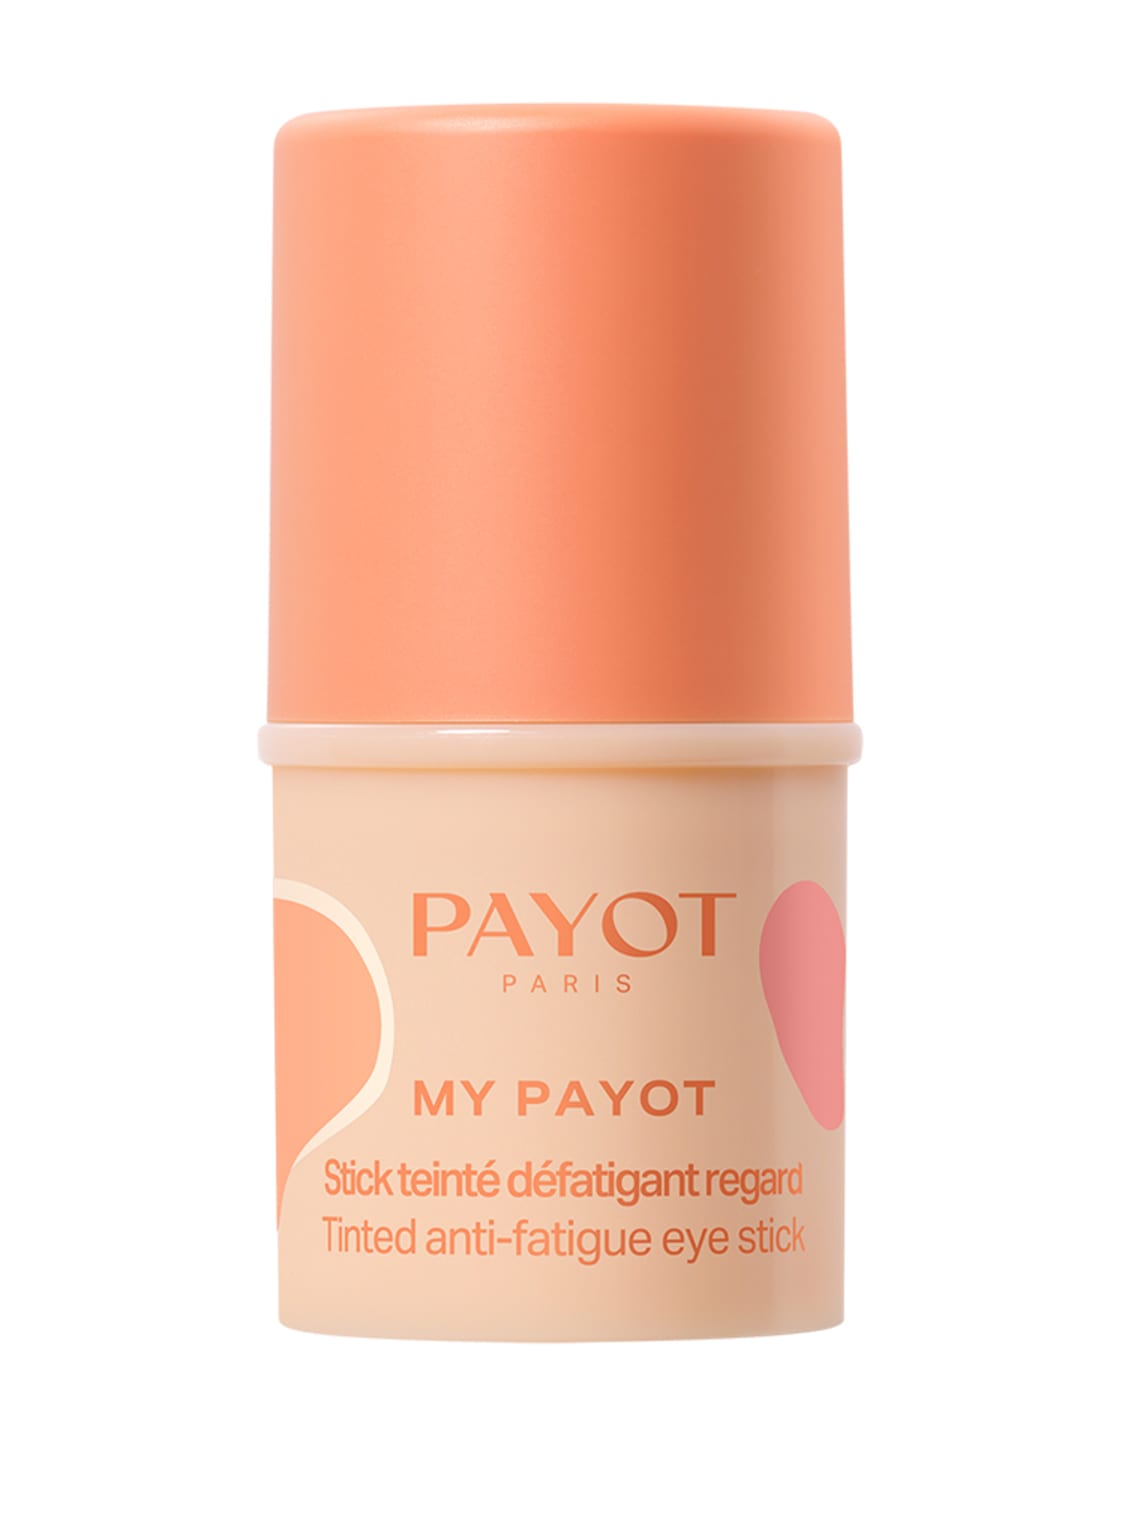 Payot My Payot Tinted anti-fatigue eye stick 4.5 g von PAYOT